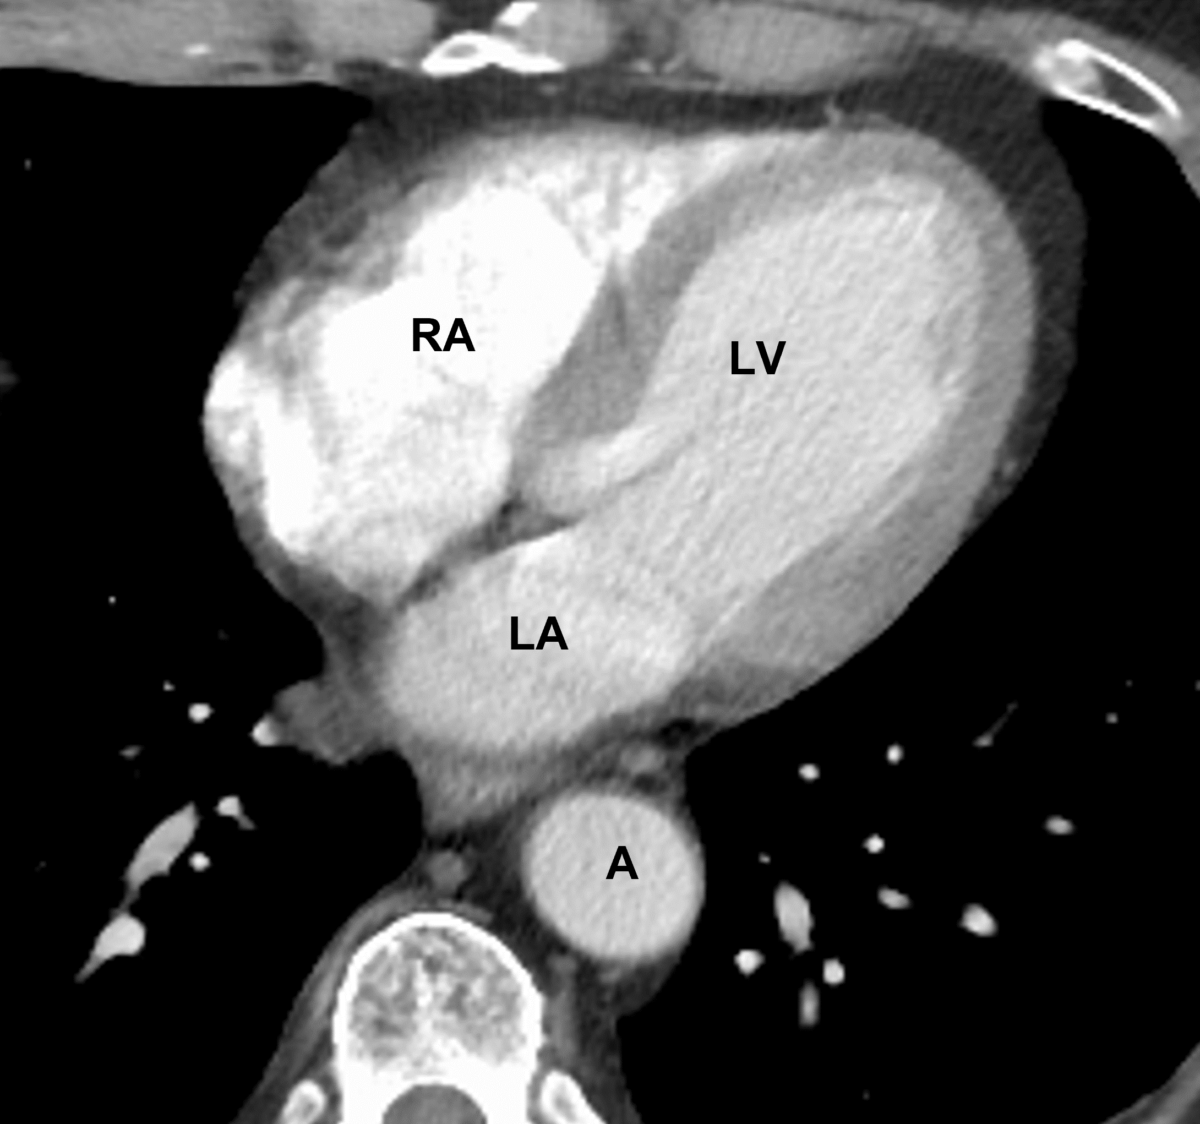 Axial chest ct visualizing the heart chambers